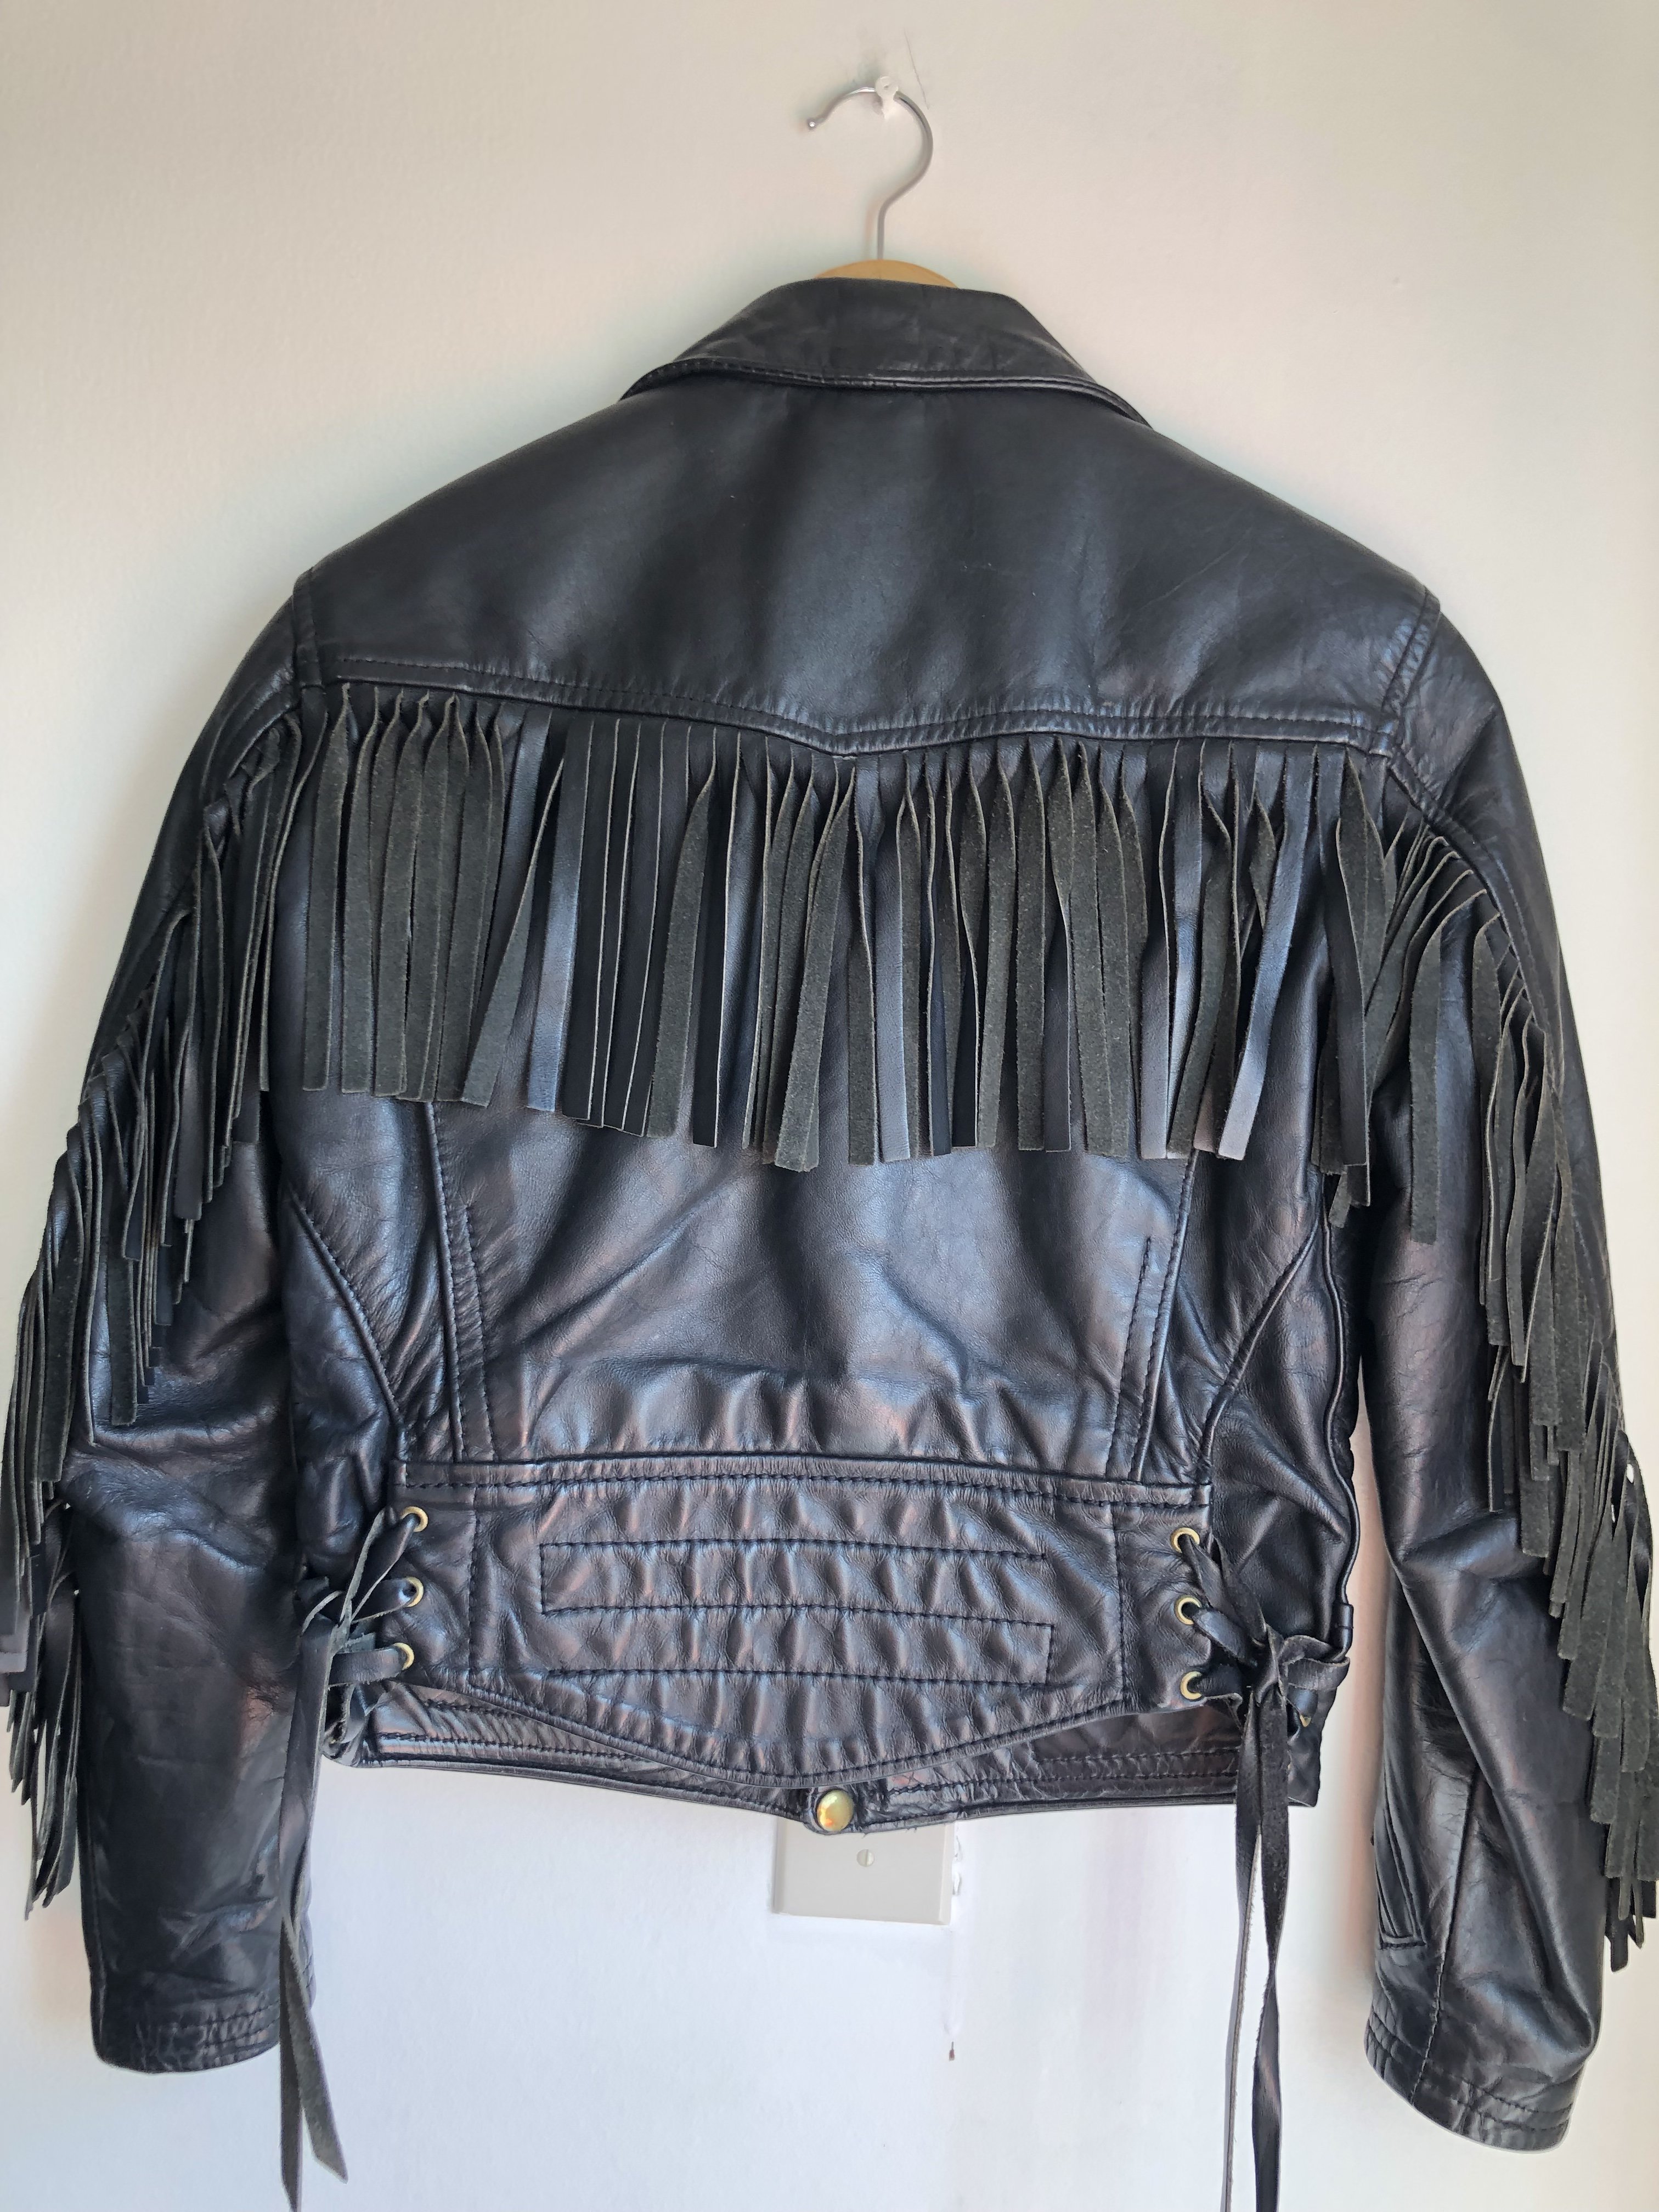 FS - Langlitz leather jacket (women’s or very small size) | The Fedora ...